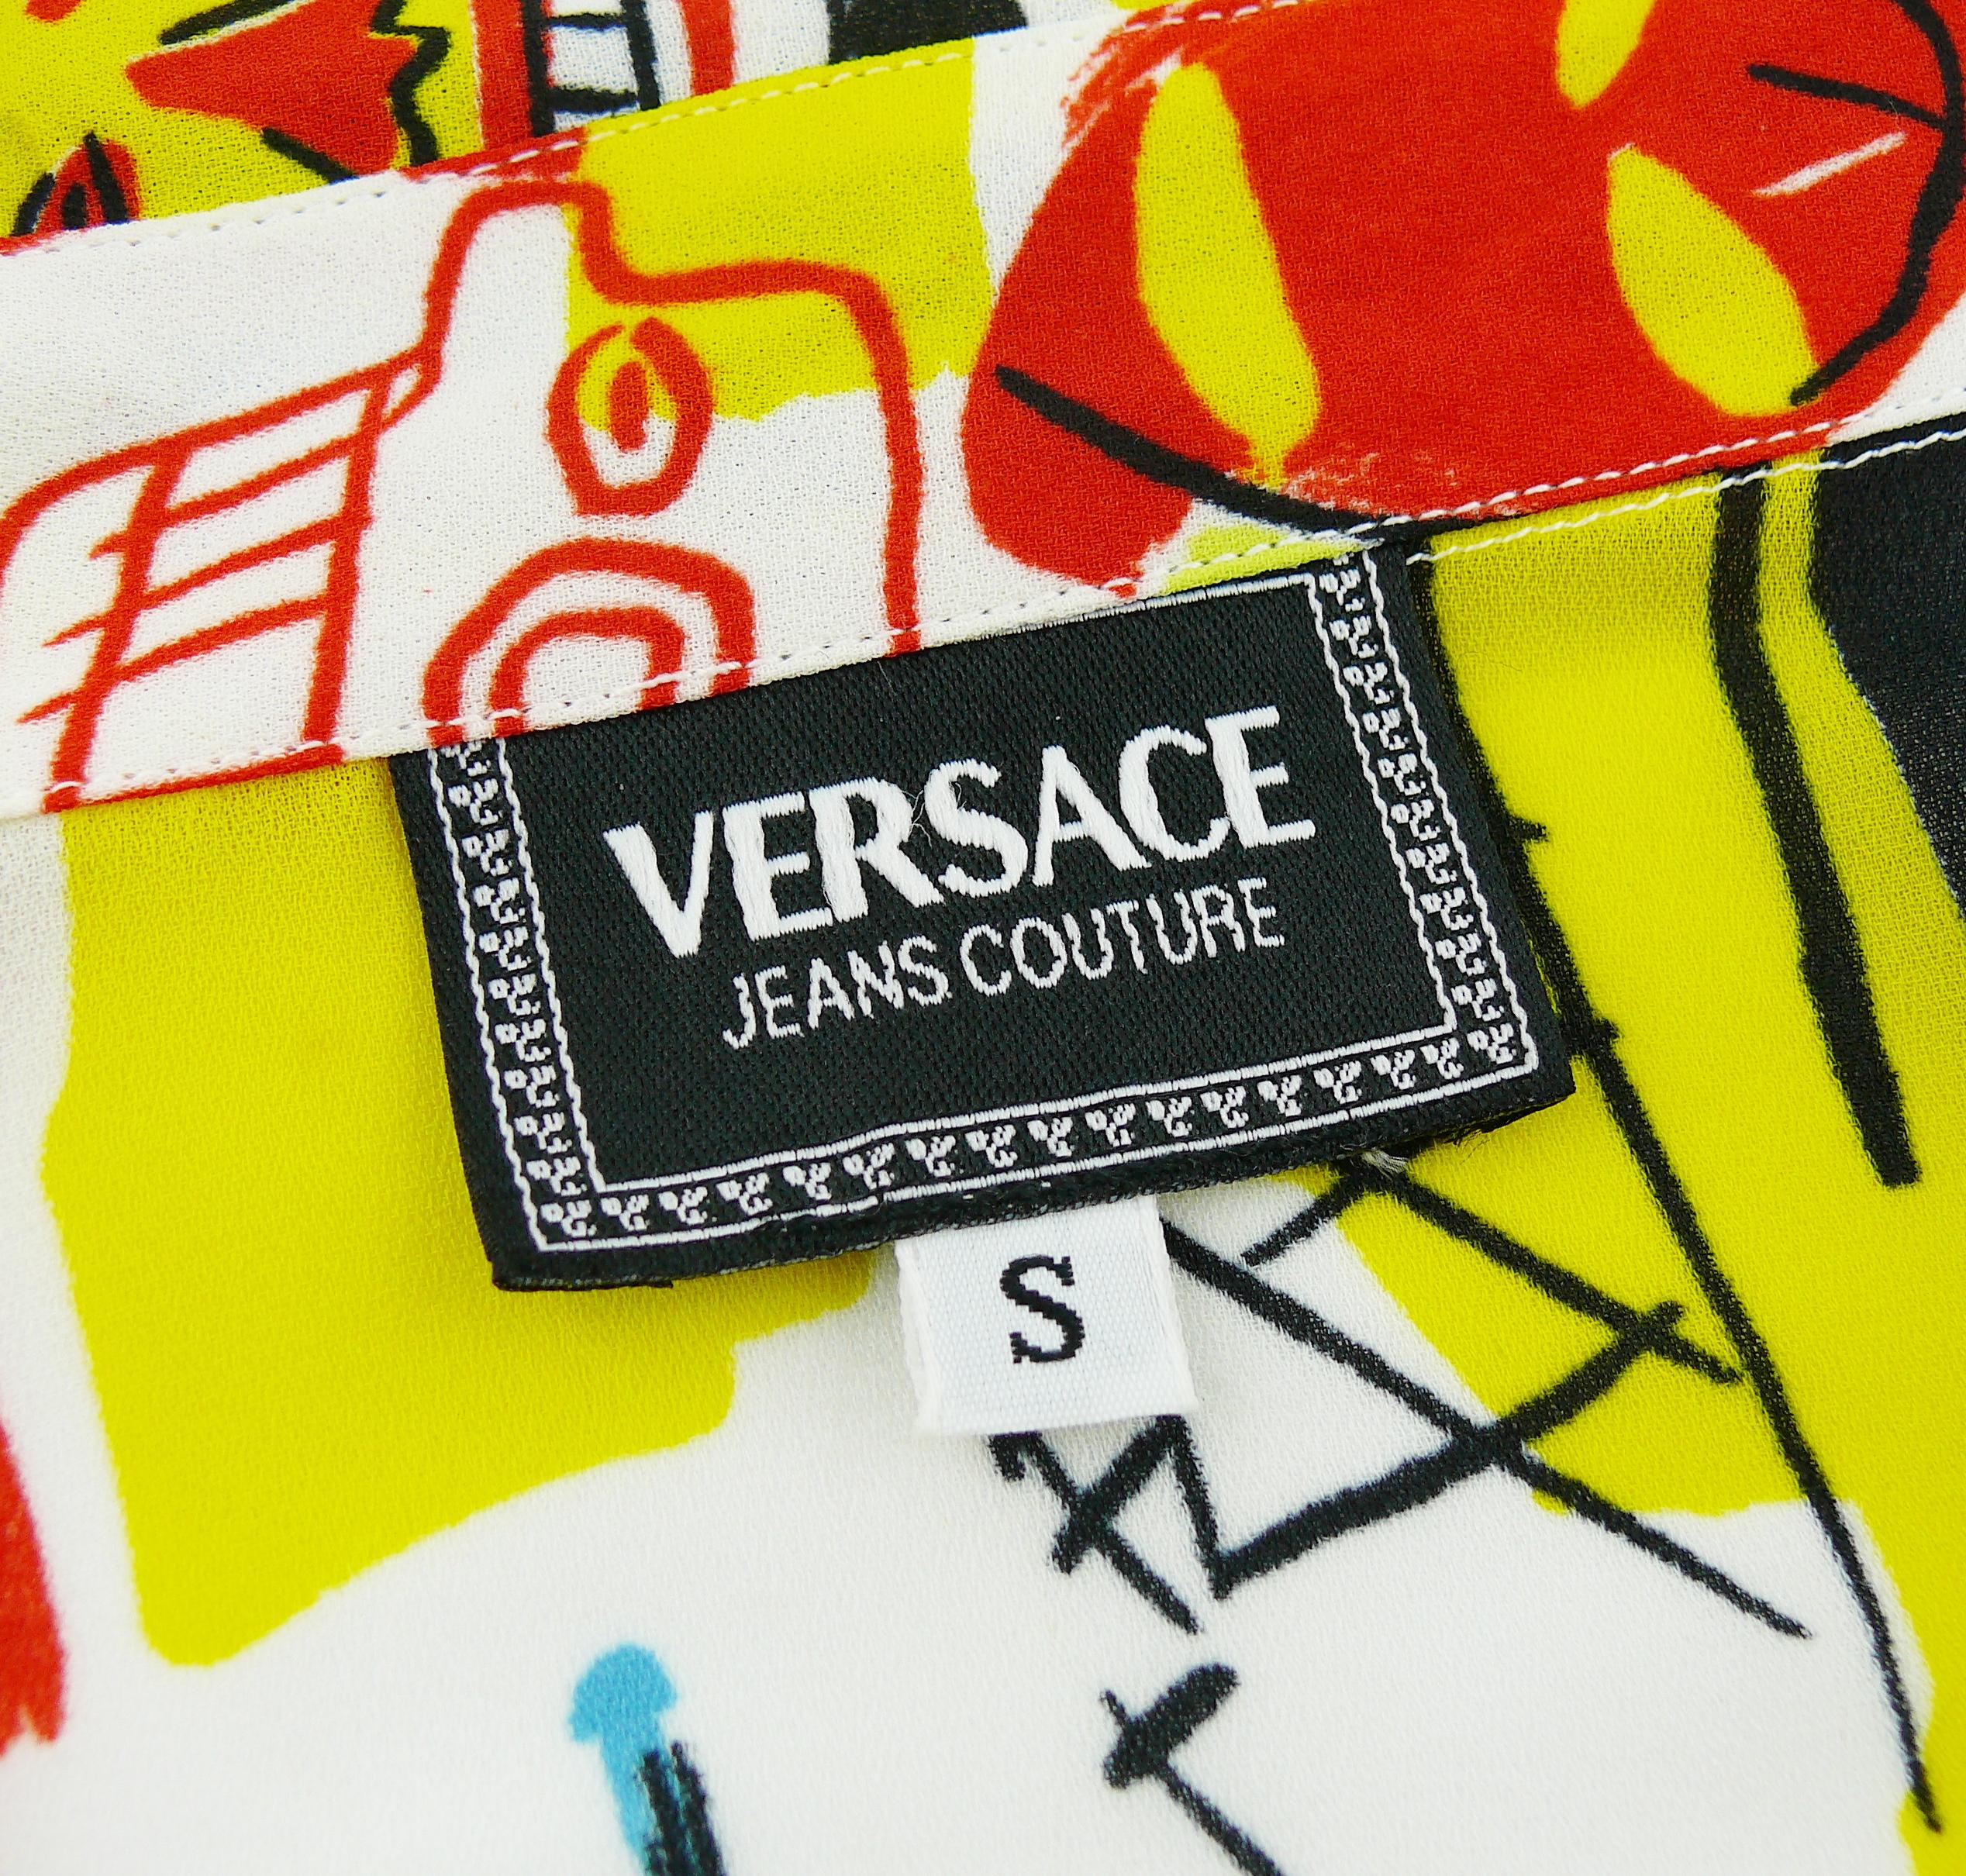 Versace Jeans Couture Vintage Basquiat Inspired Print Shirt 2